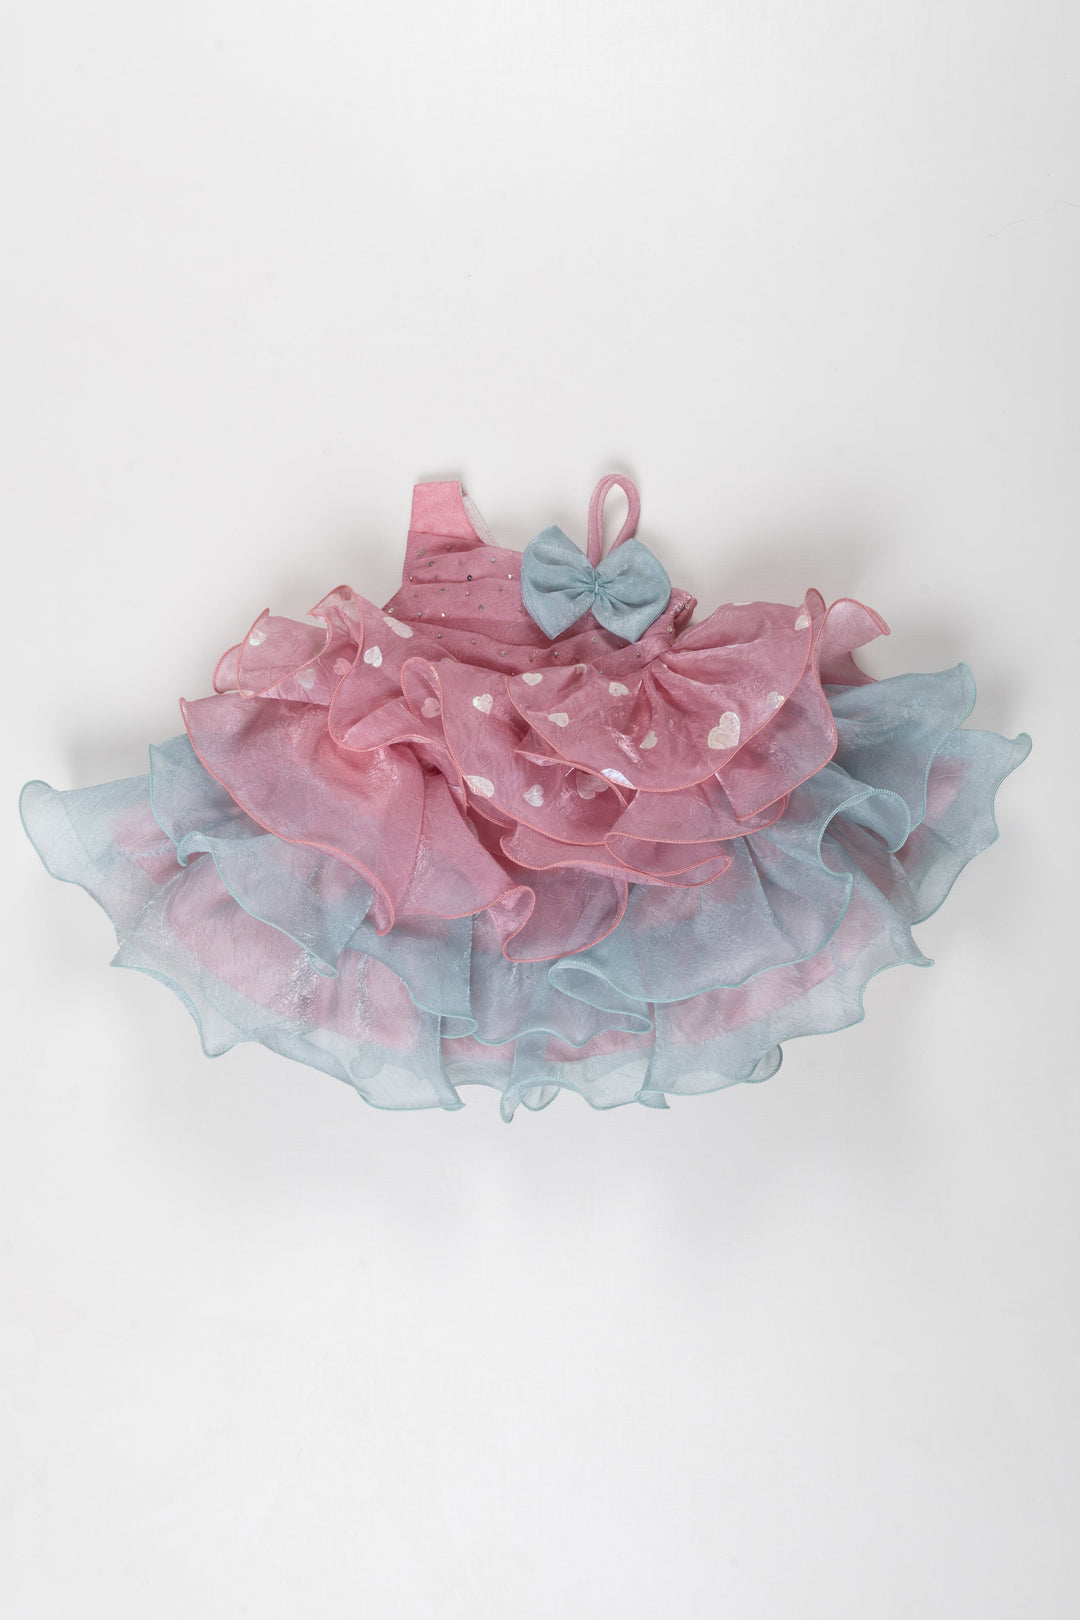 The Nesavu Girls Fancy Frock Heartfelt Whispers Tulle Party Frock: Where Whimsy Meets Grace Nesavu 16 (1Y) / Pink / Organza PF184A-16 Lavender Rose Heart Tulle Dress for Girls | Bespoke Floral Party Frock Online | The Nesavu